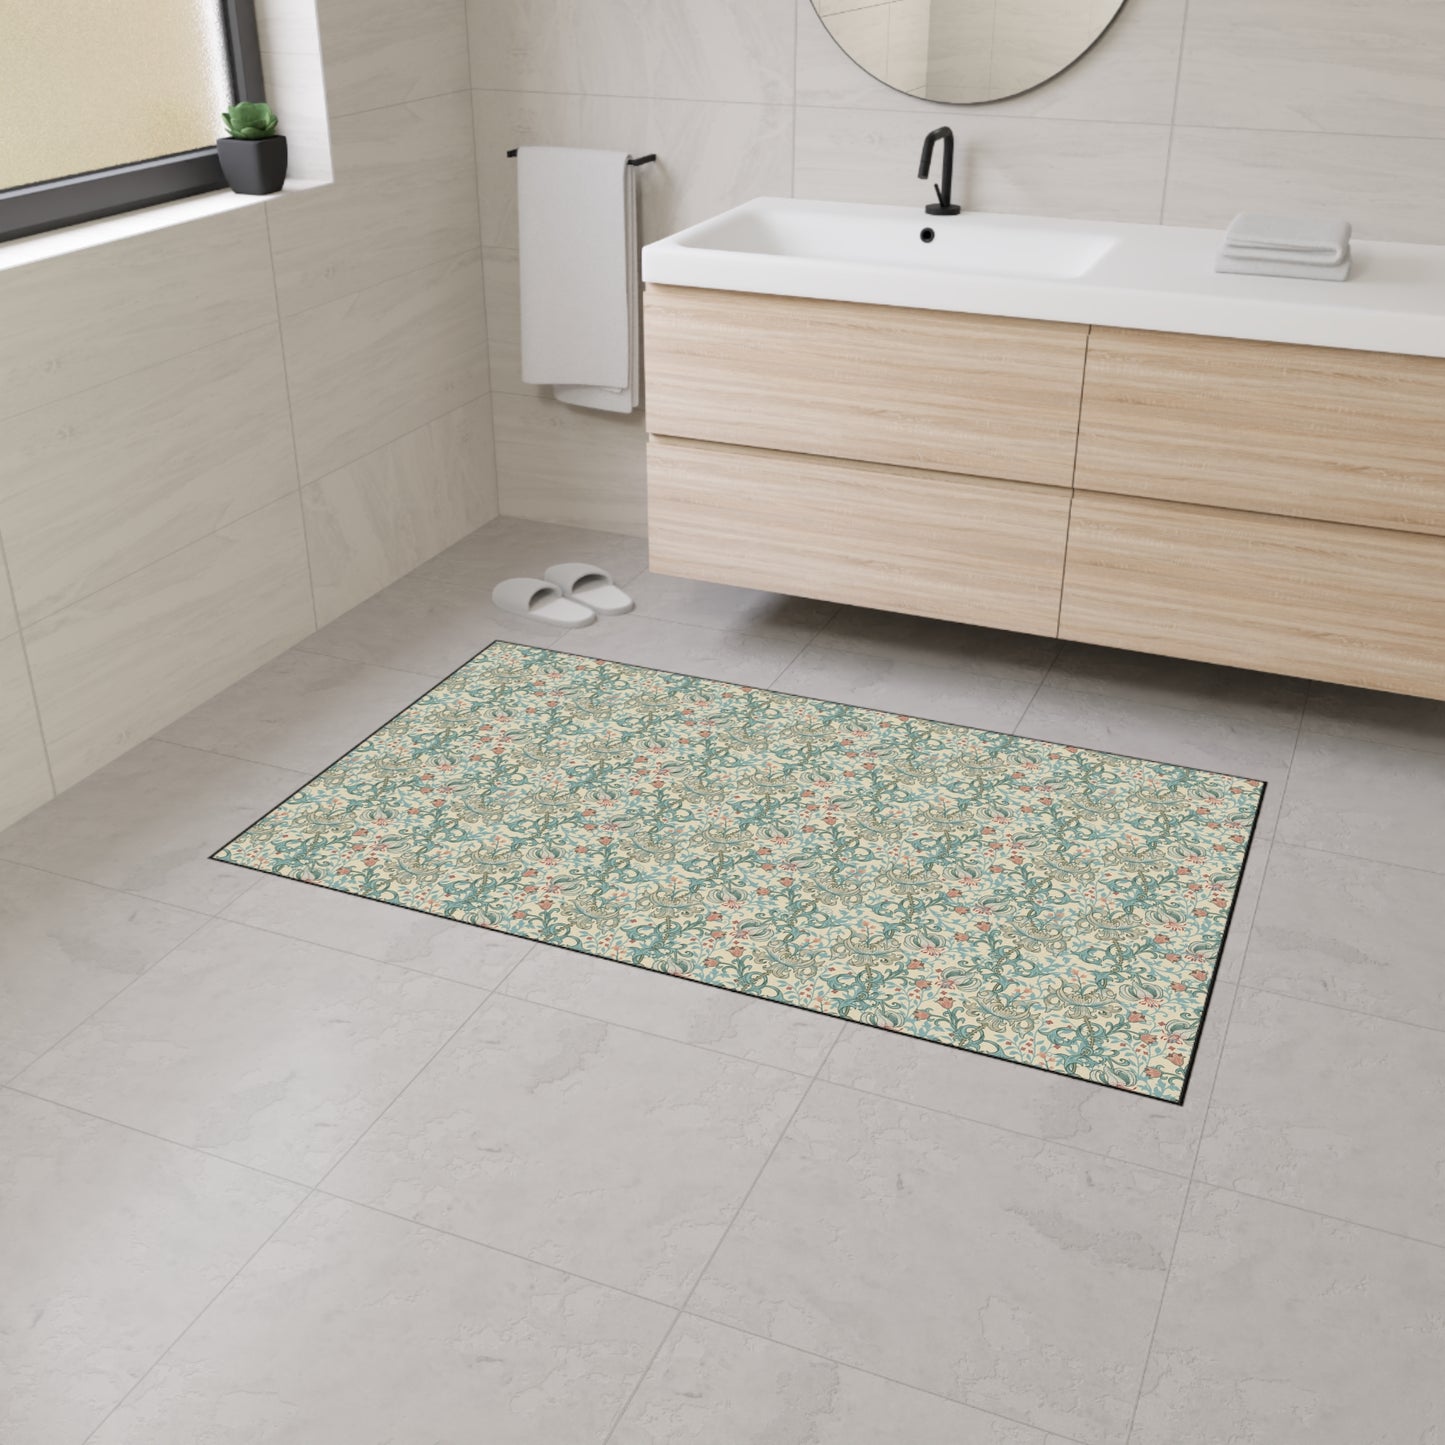 william-morris-co-heavy-duty-floor-mat-golden-lily-collection-mineral-16